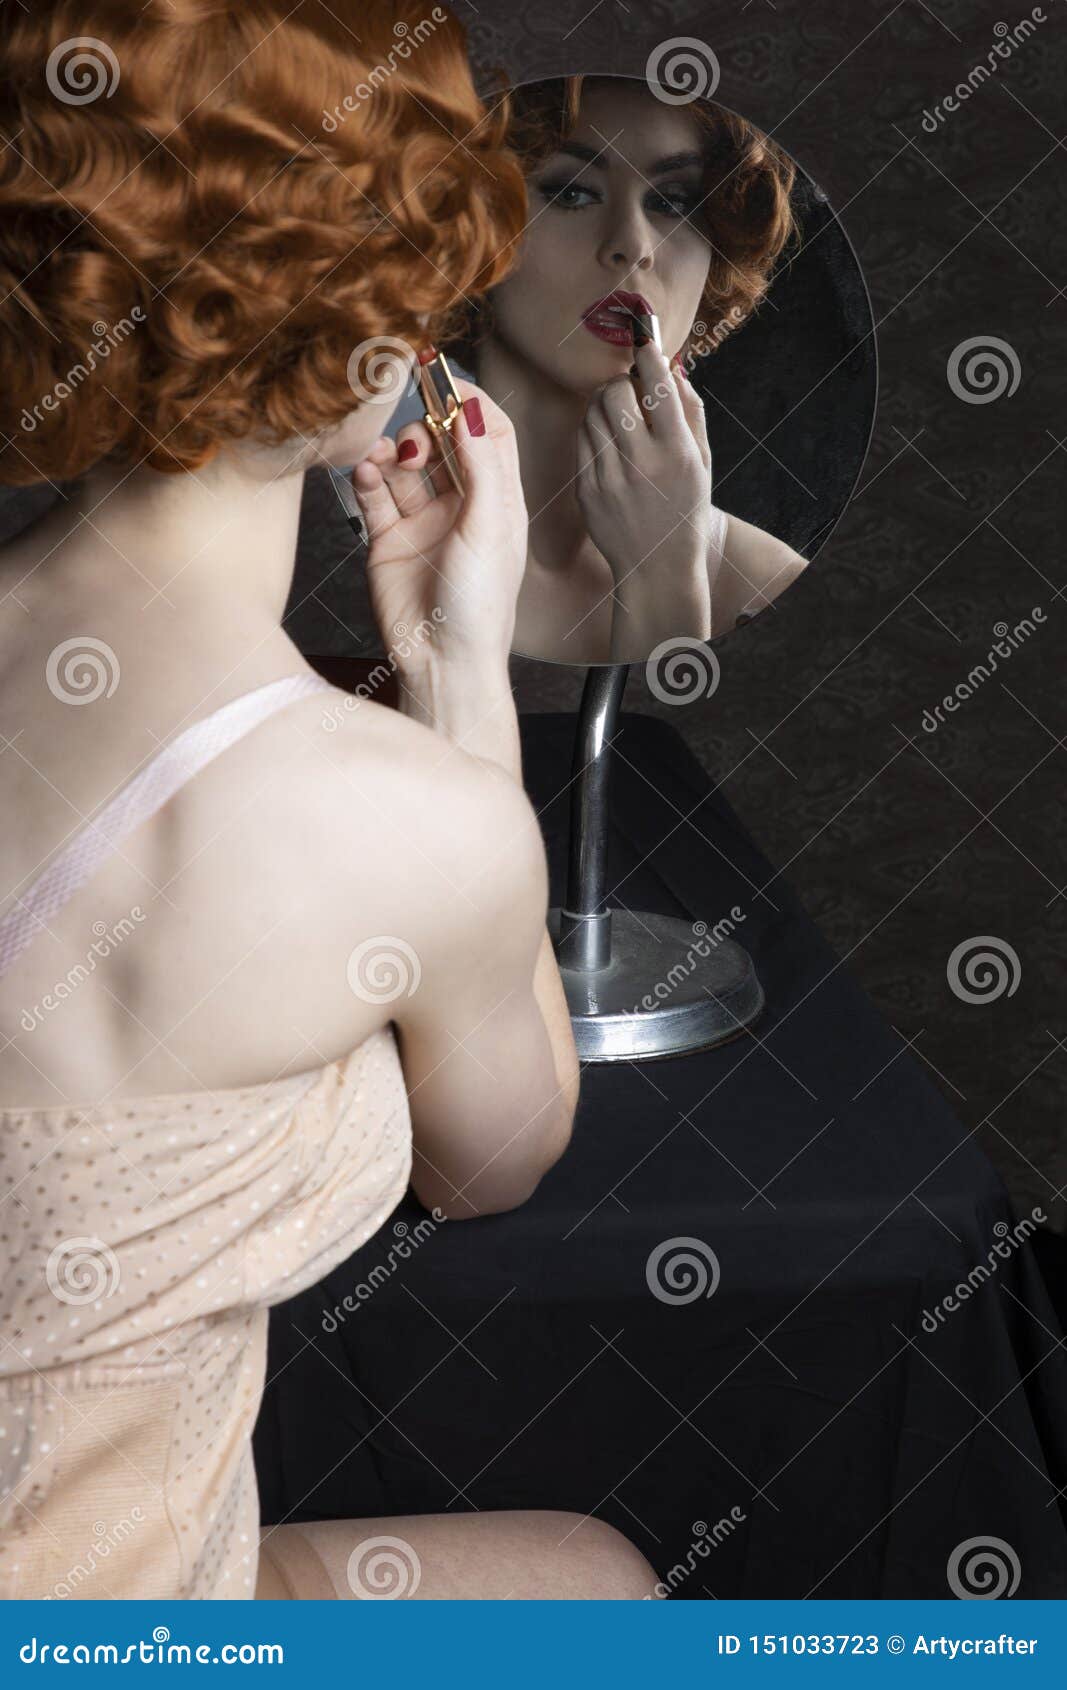 https://thumbs.dreamstime.com/z/s-woman-girdle-stockings-doing-her-makeup-151033723.jpg